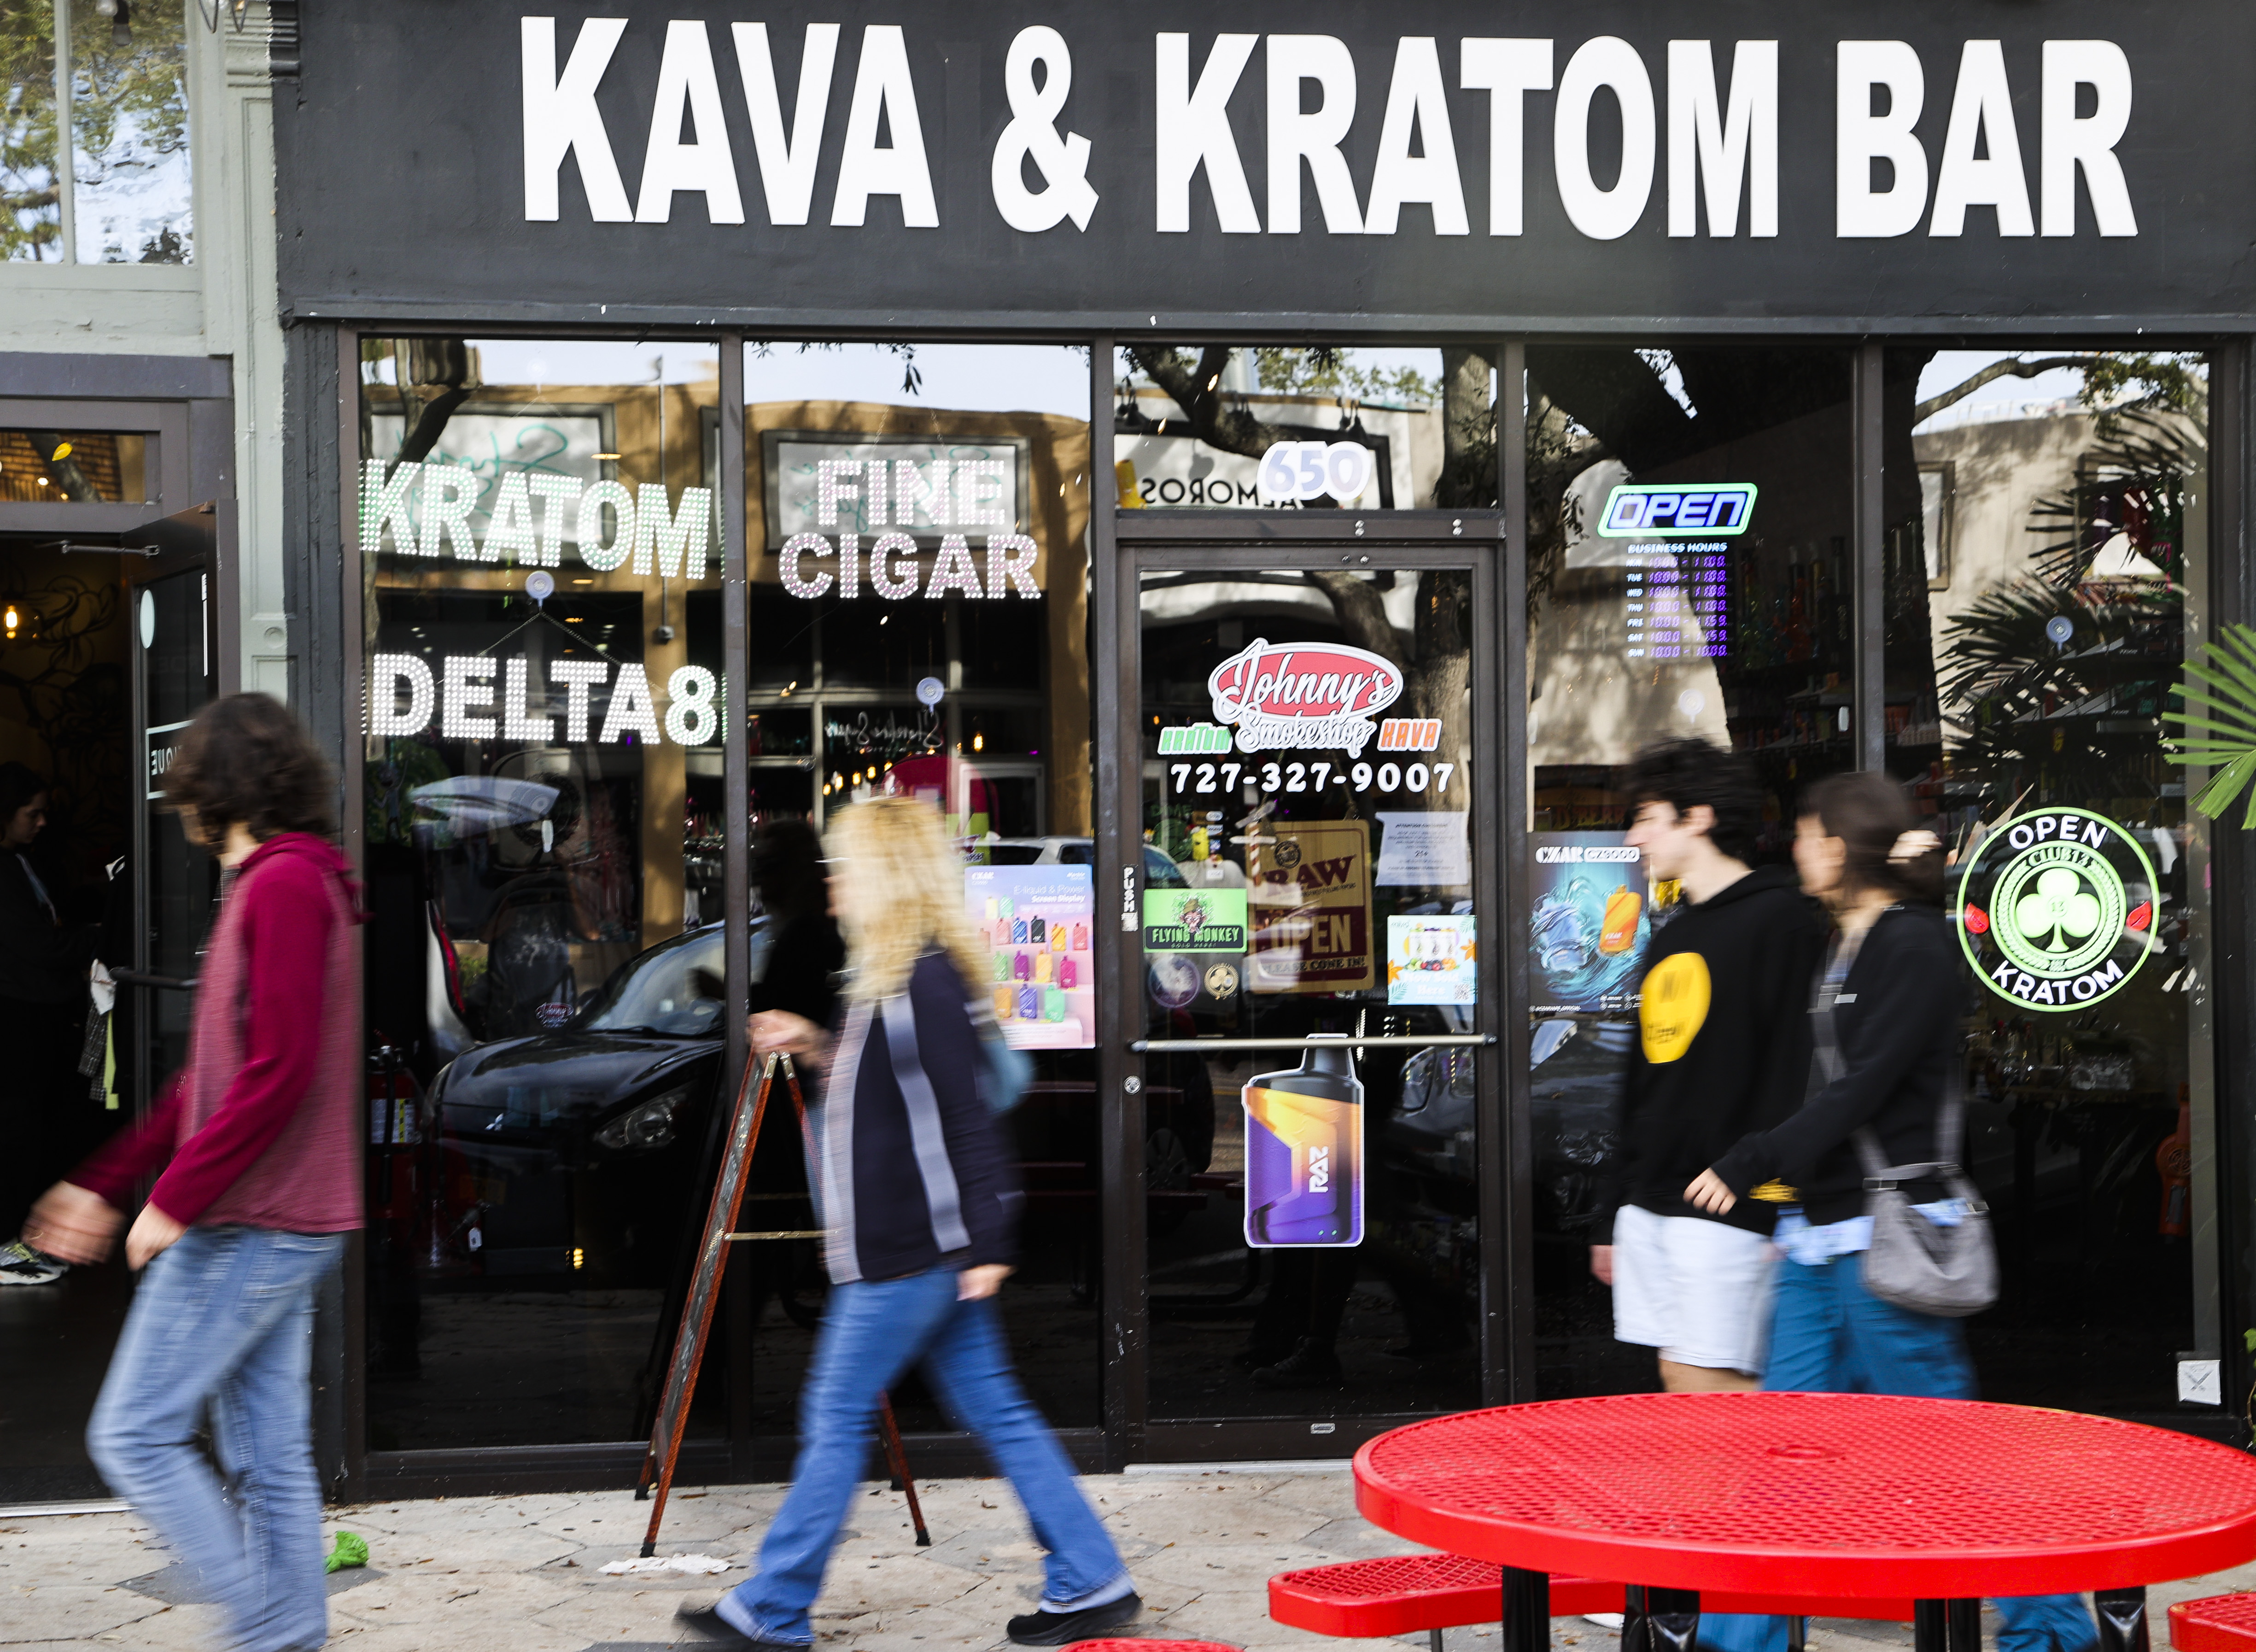 Before kratom products reach stores like this one on St.
              Petersburg’s Central Avenue, they have likely traveled thousands of
              miles, from the fields of Indonesia to manufacturing and packaging facilities in the U.S.